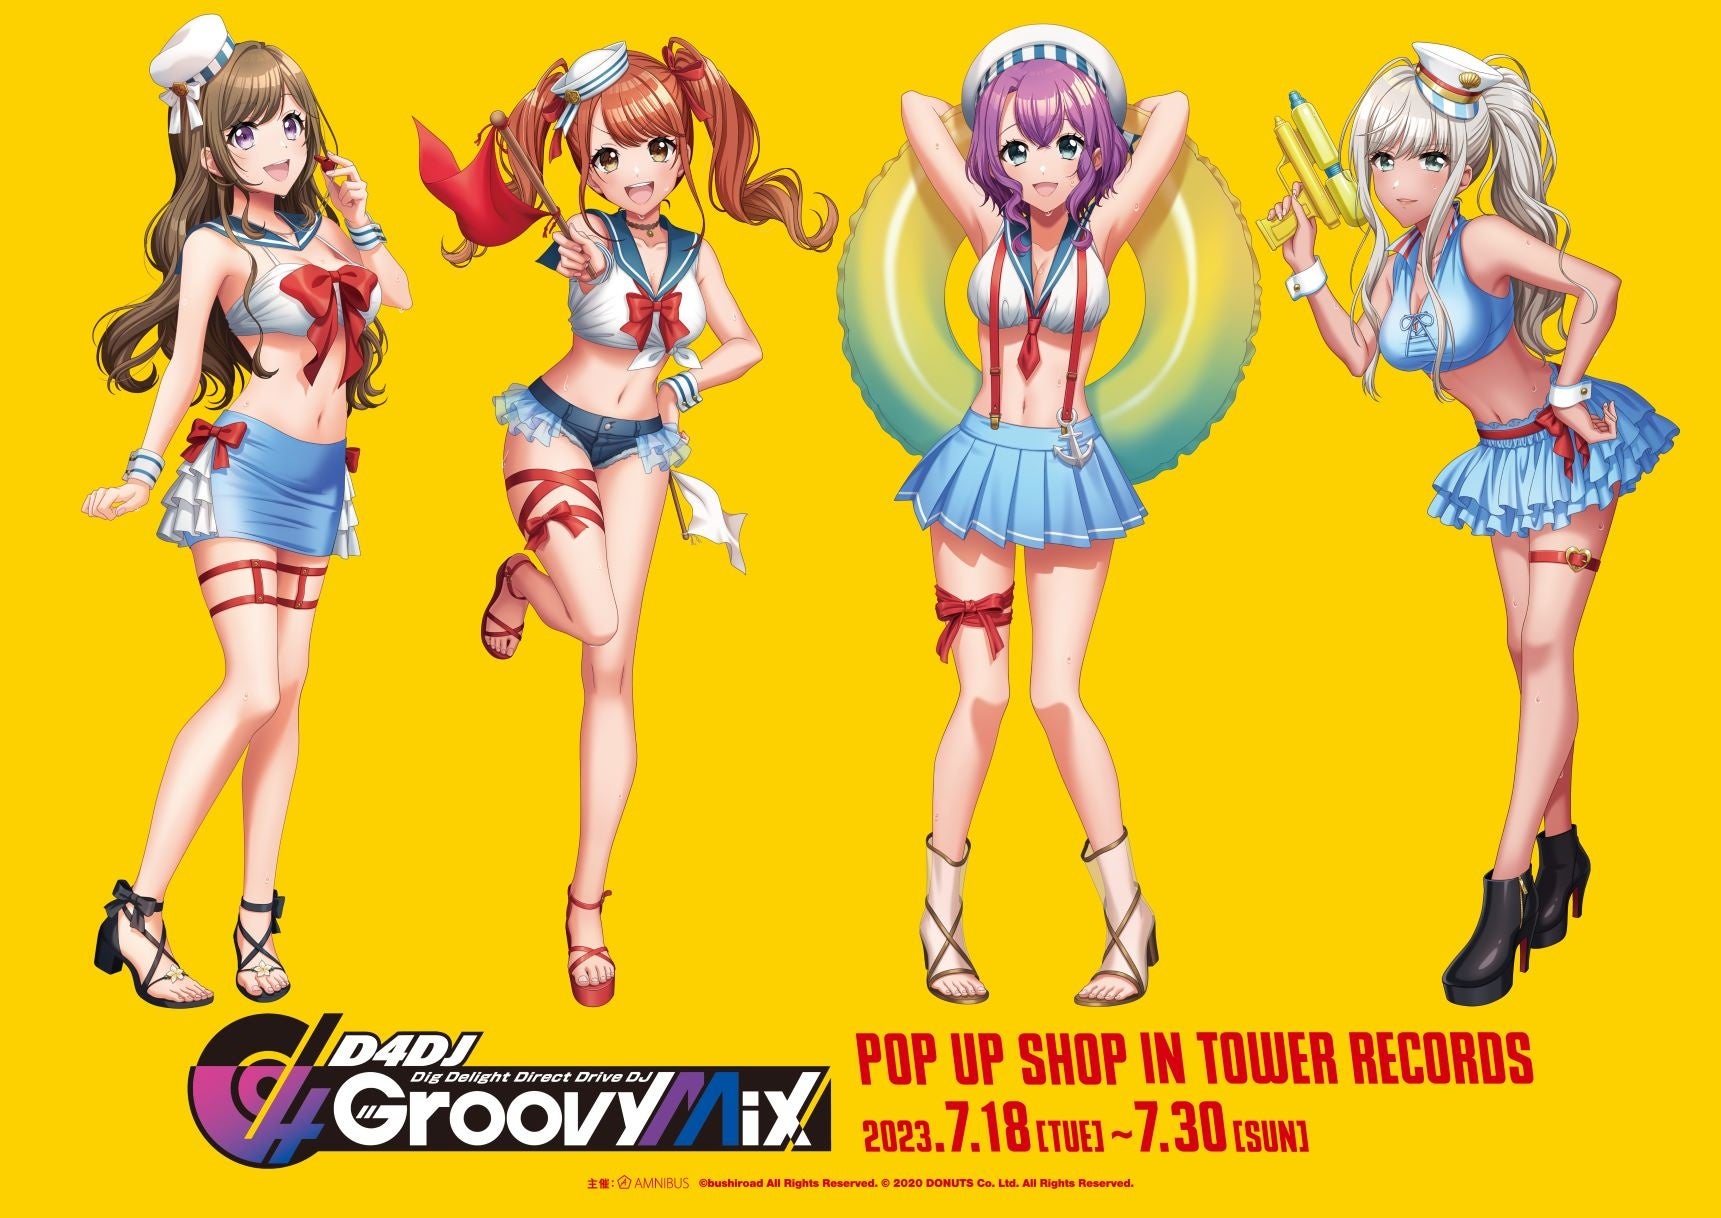 『D4DJ Groovy Mix』のイベント「D4DJ Groovy Mix POP UP SHOP in TOWER RECORDS」7/18～タワレコ東名阪福4店舗で開催が決定！